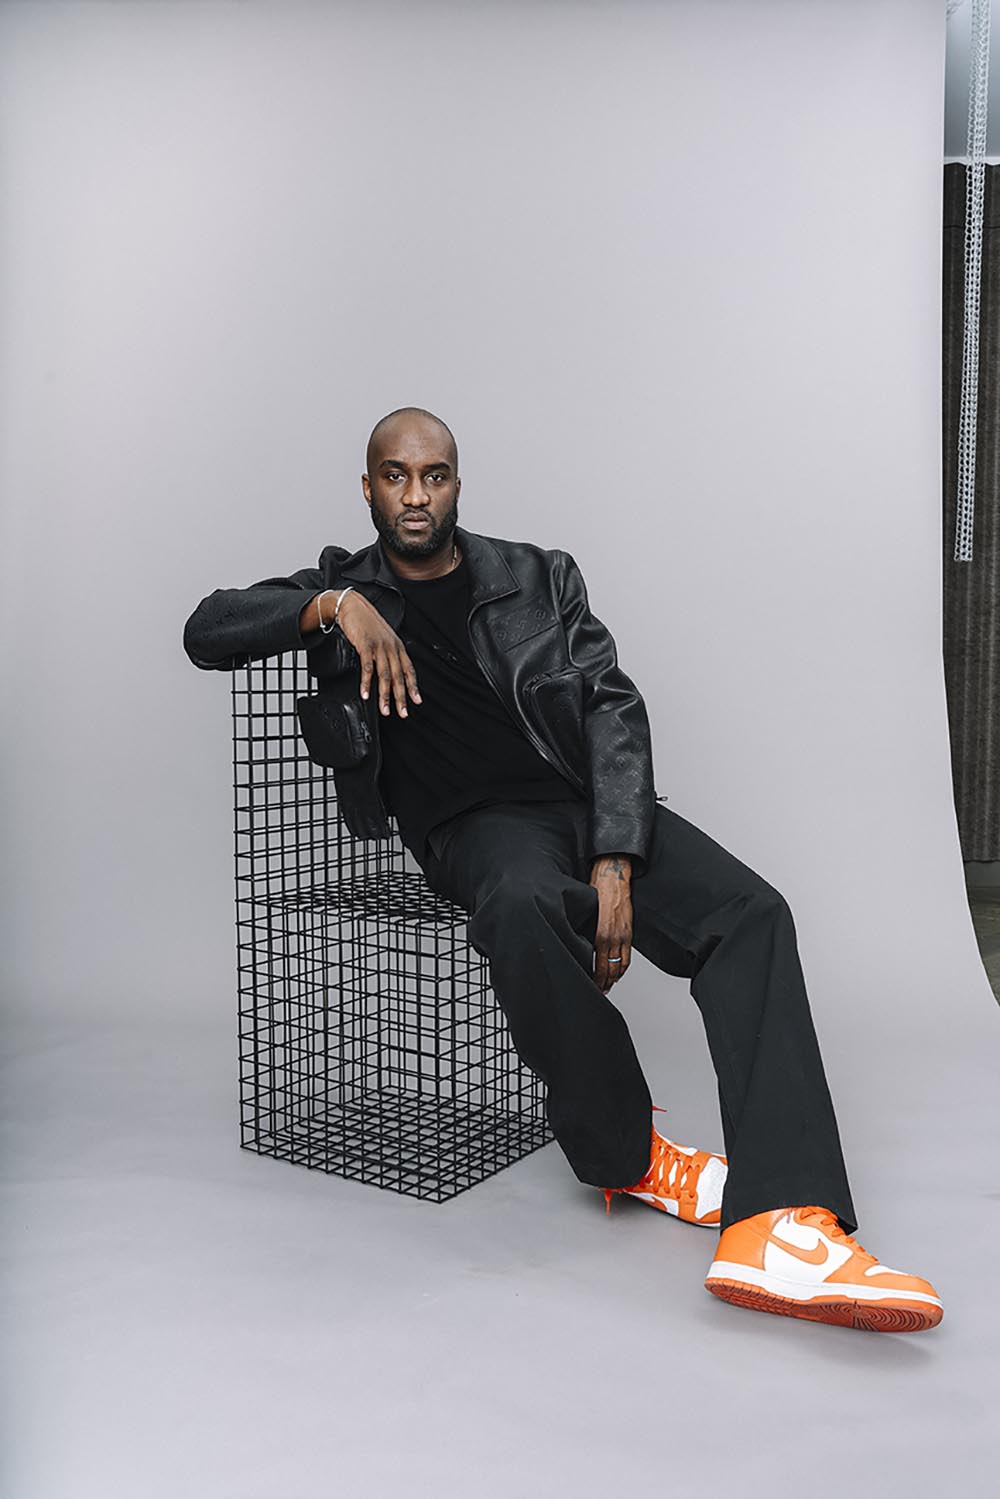 Virgil Abloh's best work: 6 projects that show his prolific mind and a